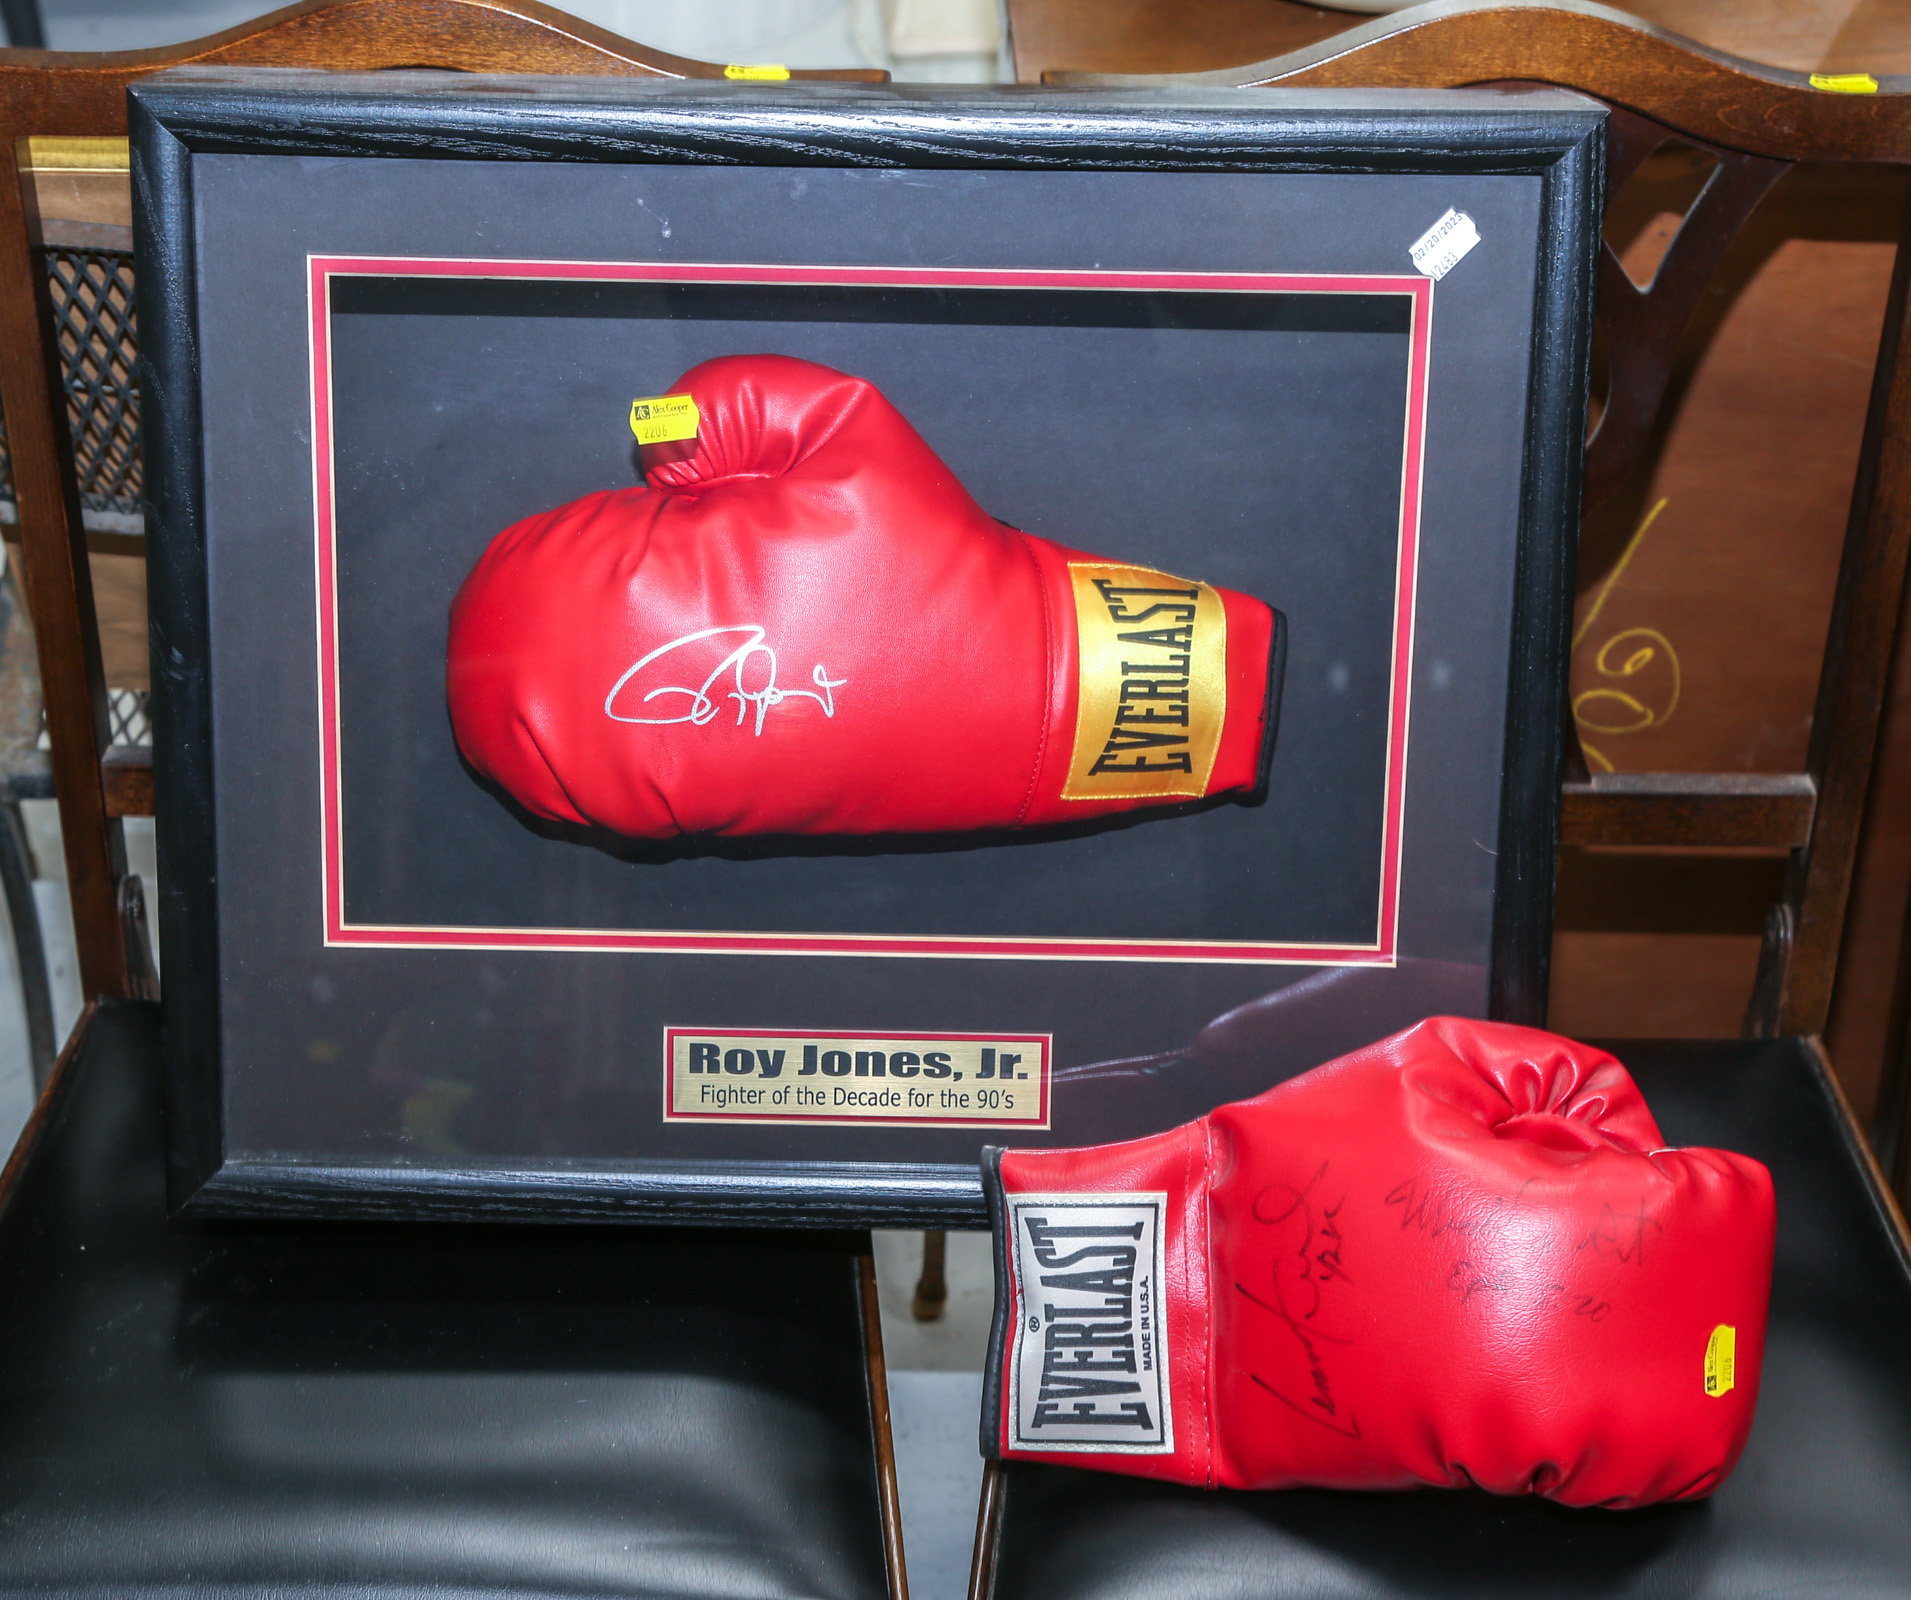 TWO AUTOGRAPHED BOXING GLOVES Comprising